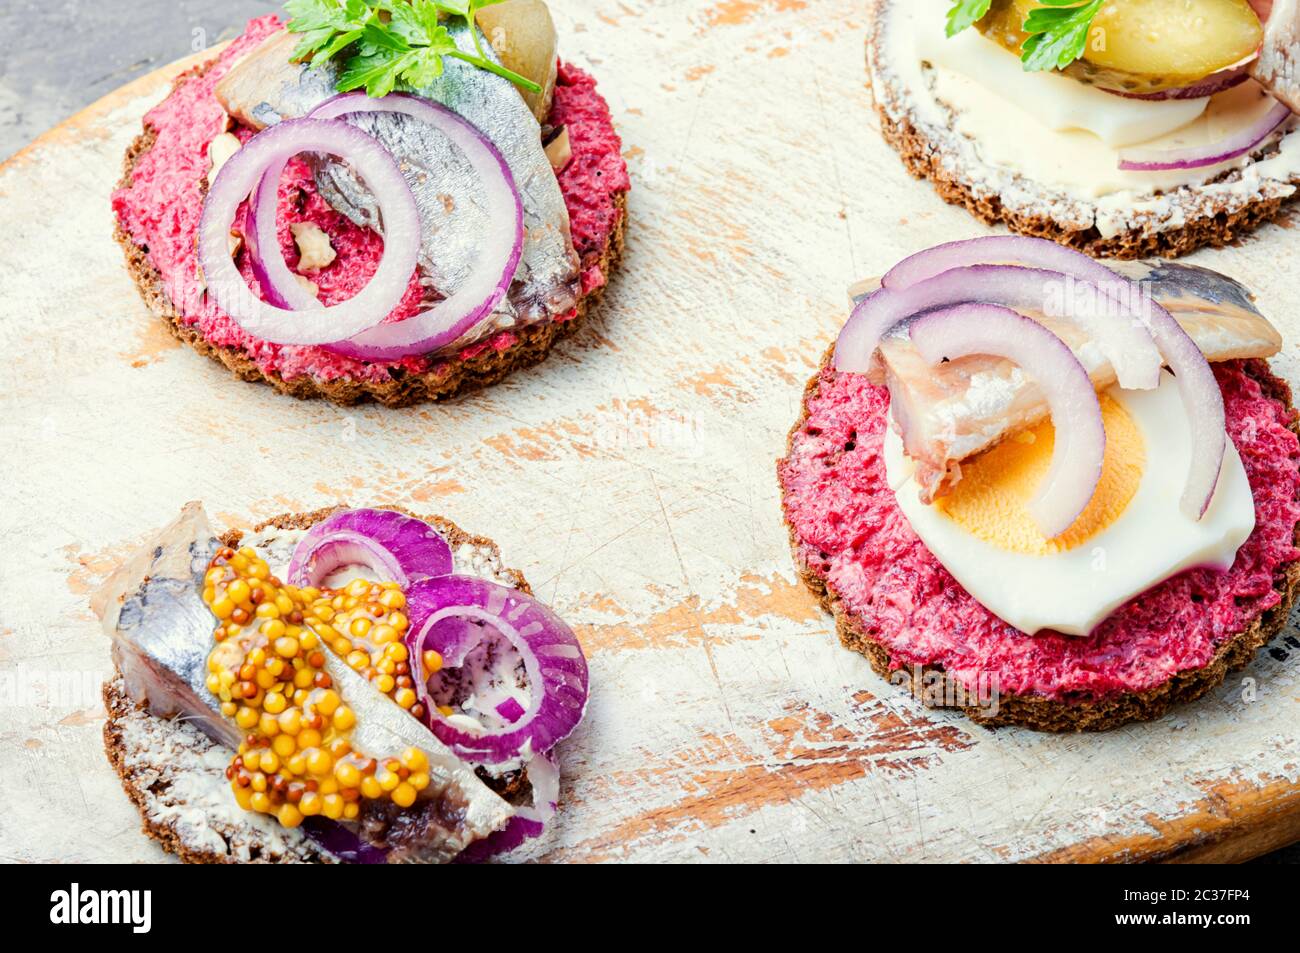 Small sandwiches or bruschettas with salted herring and beetroot.Open sandwich with salted herring Stock Photo